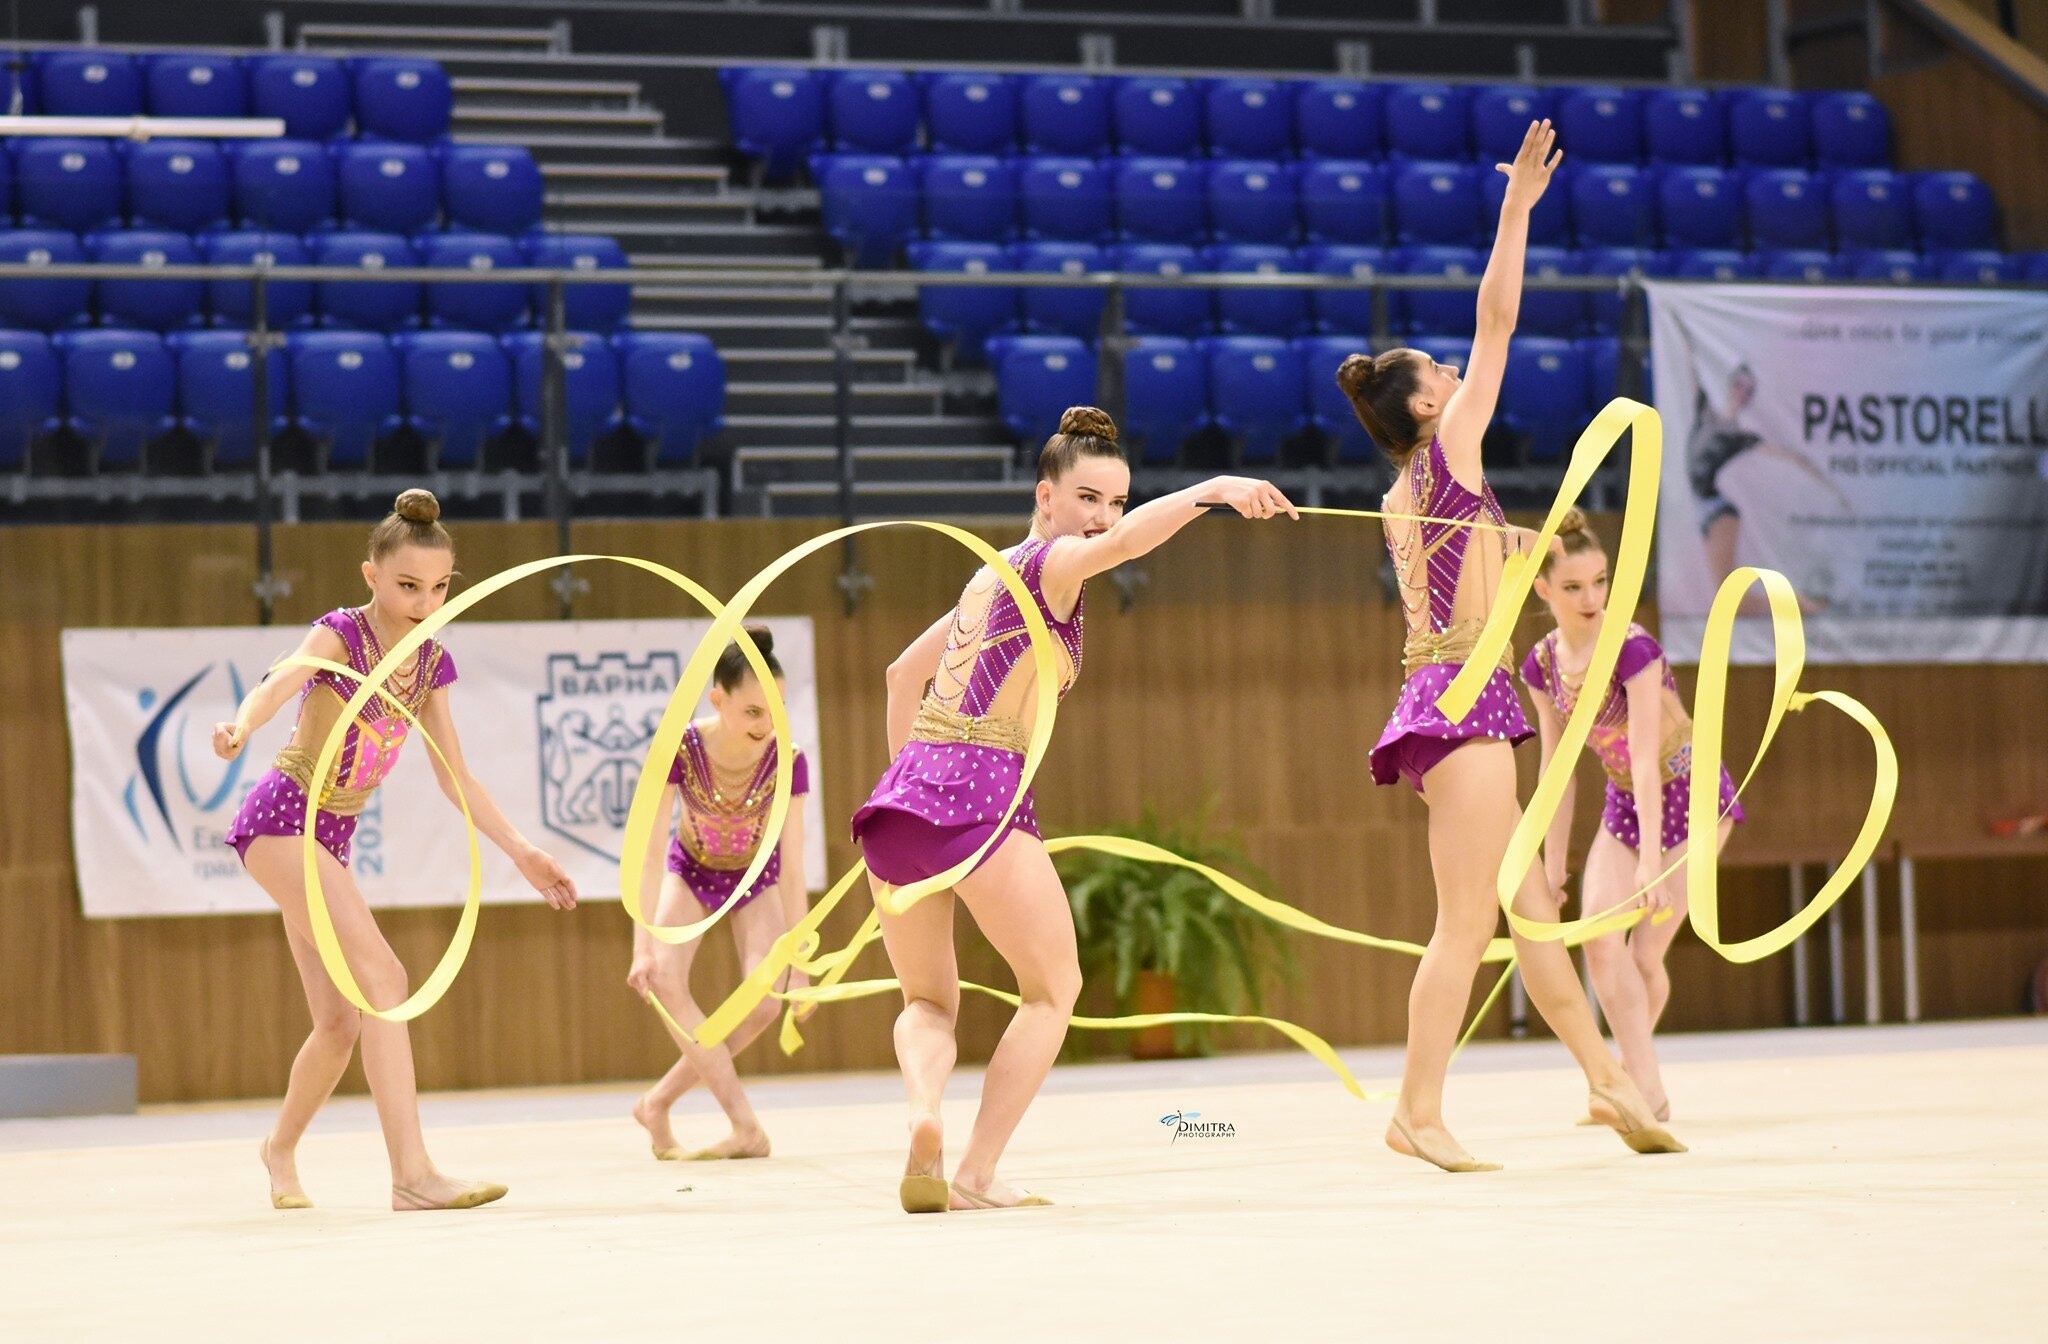 Rhythmic Gymnastics: Group performance by young gymnasts equipped with yellow ribbons, Artistic sport. 2050x1350 HD Wallpaper.